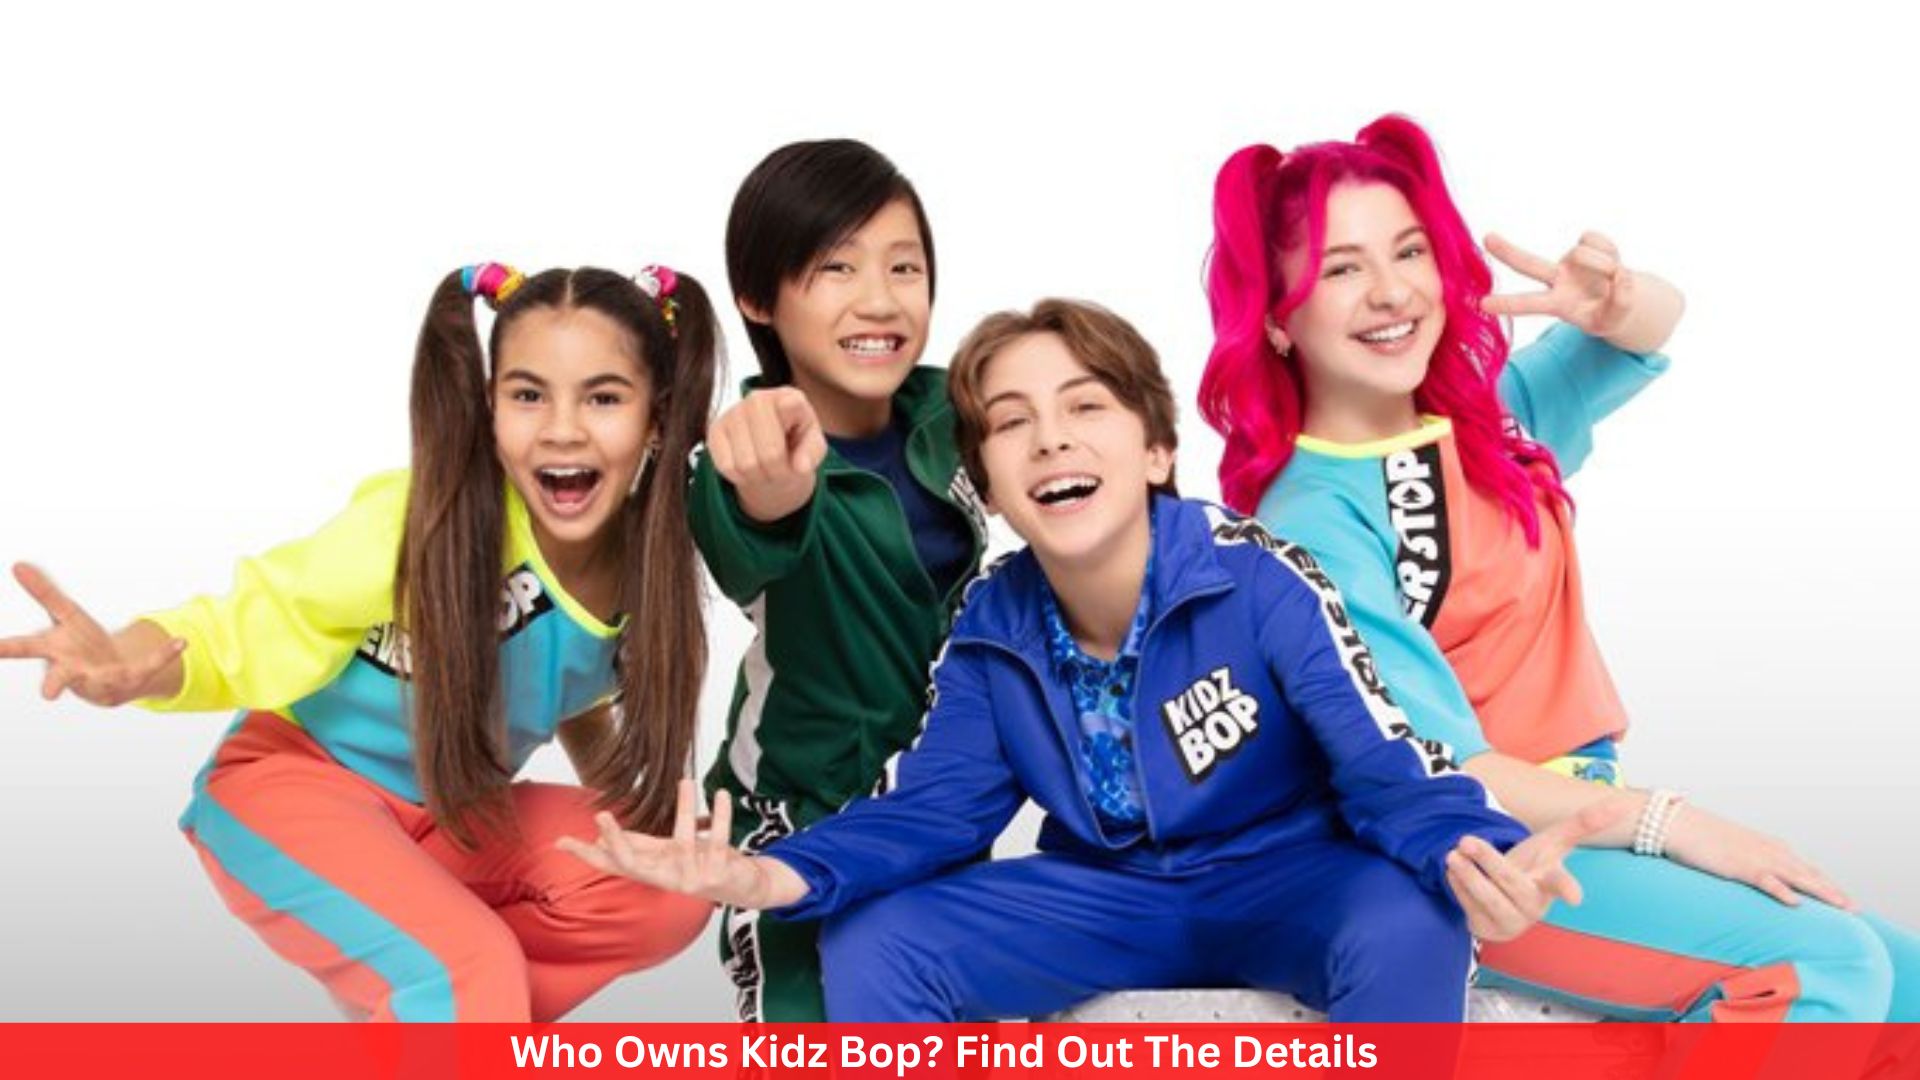 Who Owns Kidz Bop? Find Out The Details